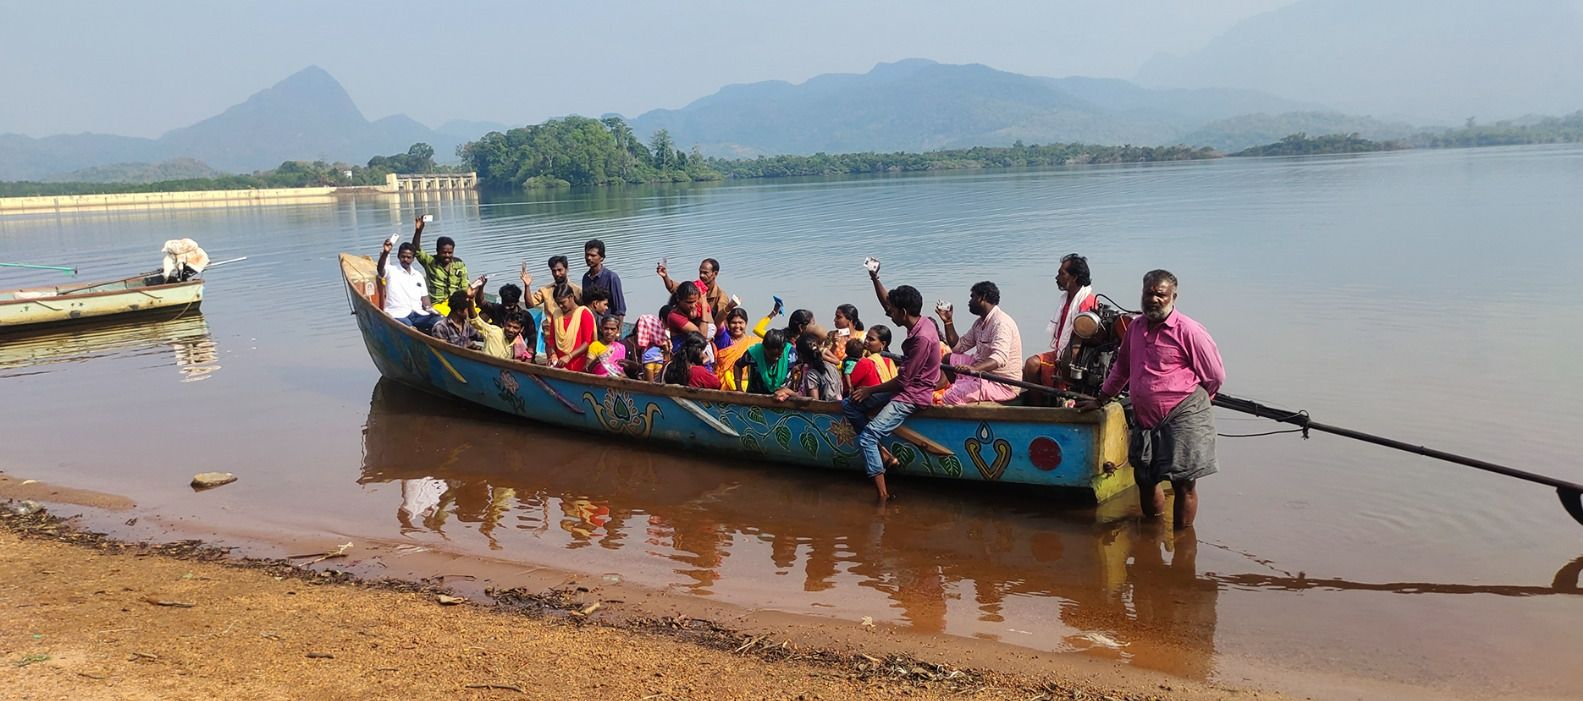 Hill people paid ₹40 to vote by boat - democratic duty in Kumari